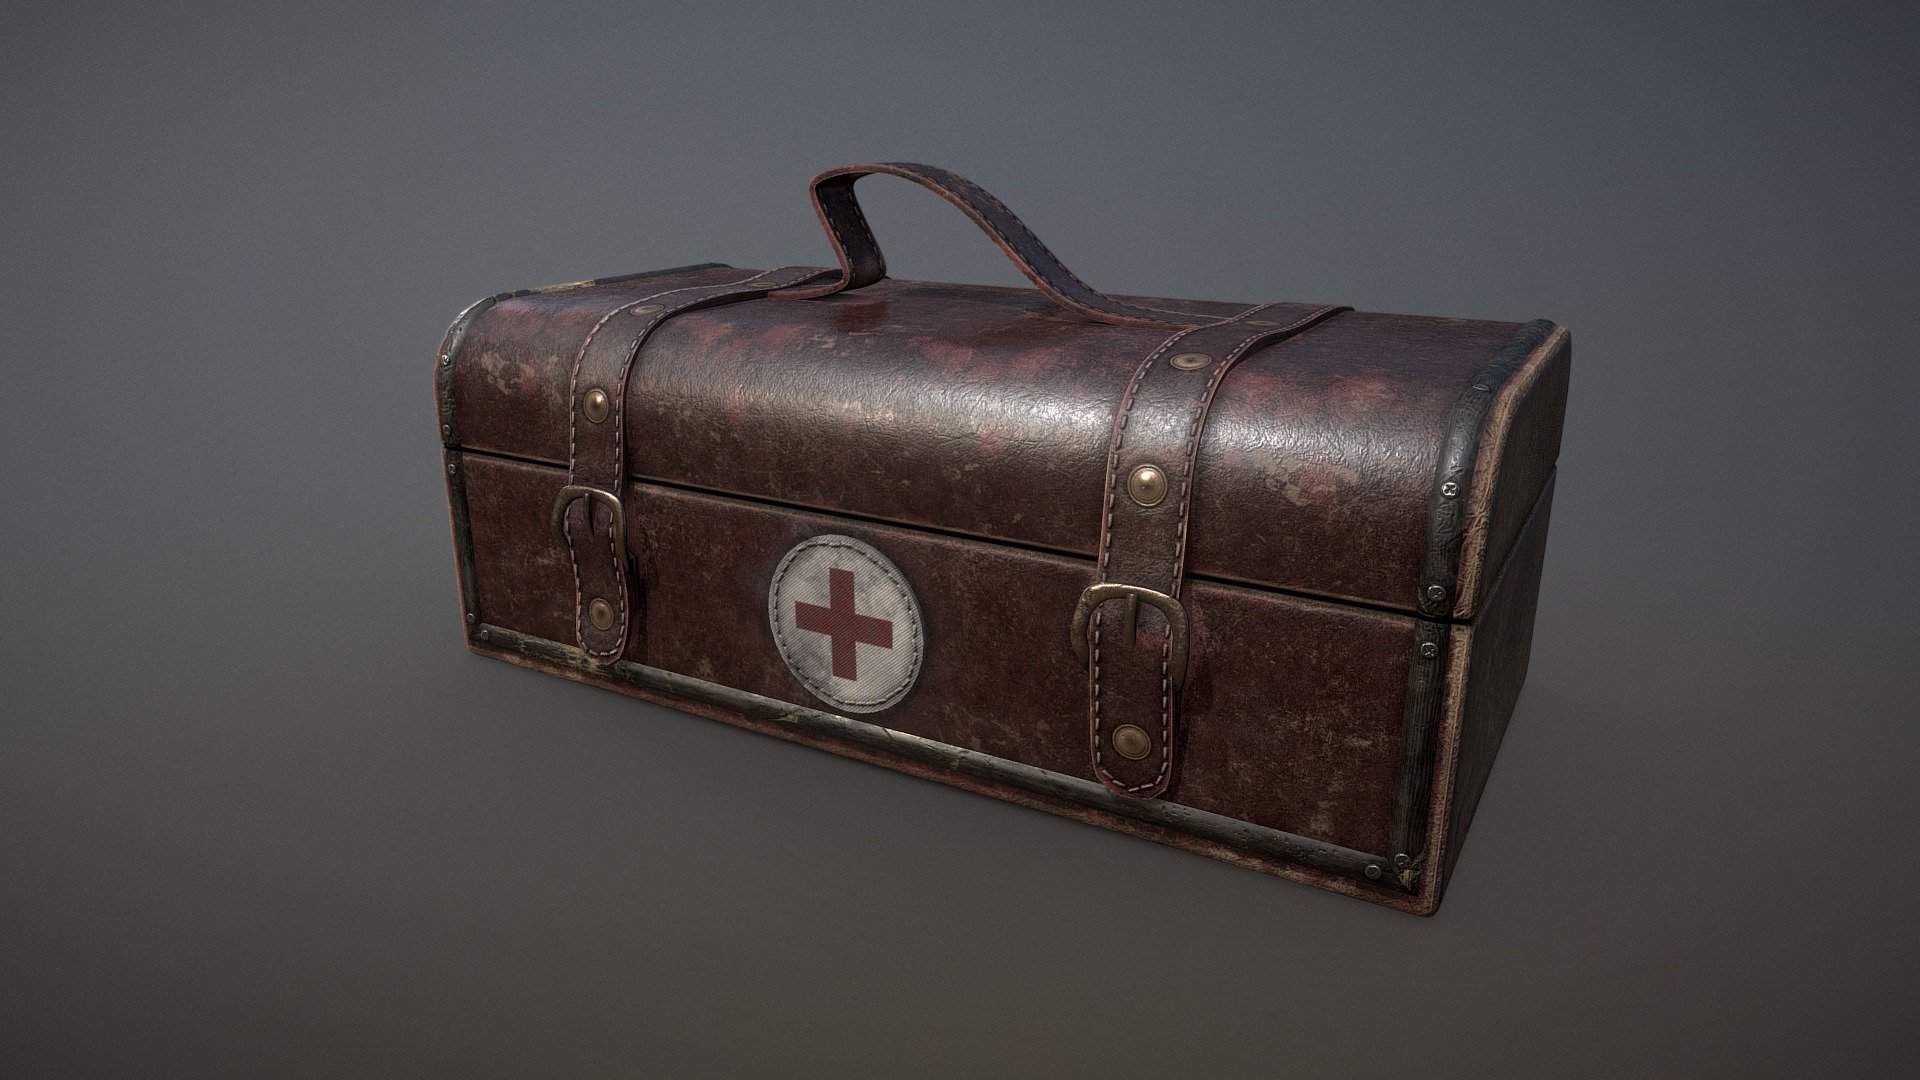 Another prop made for my submission to the WeeklyCGC #126; an antiquated doctor's satchel 3d model